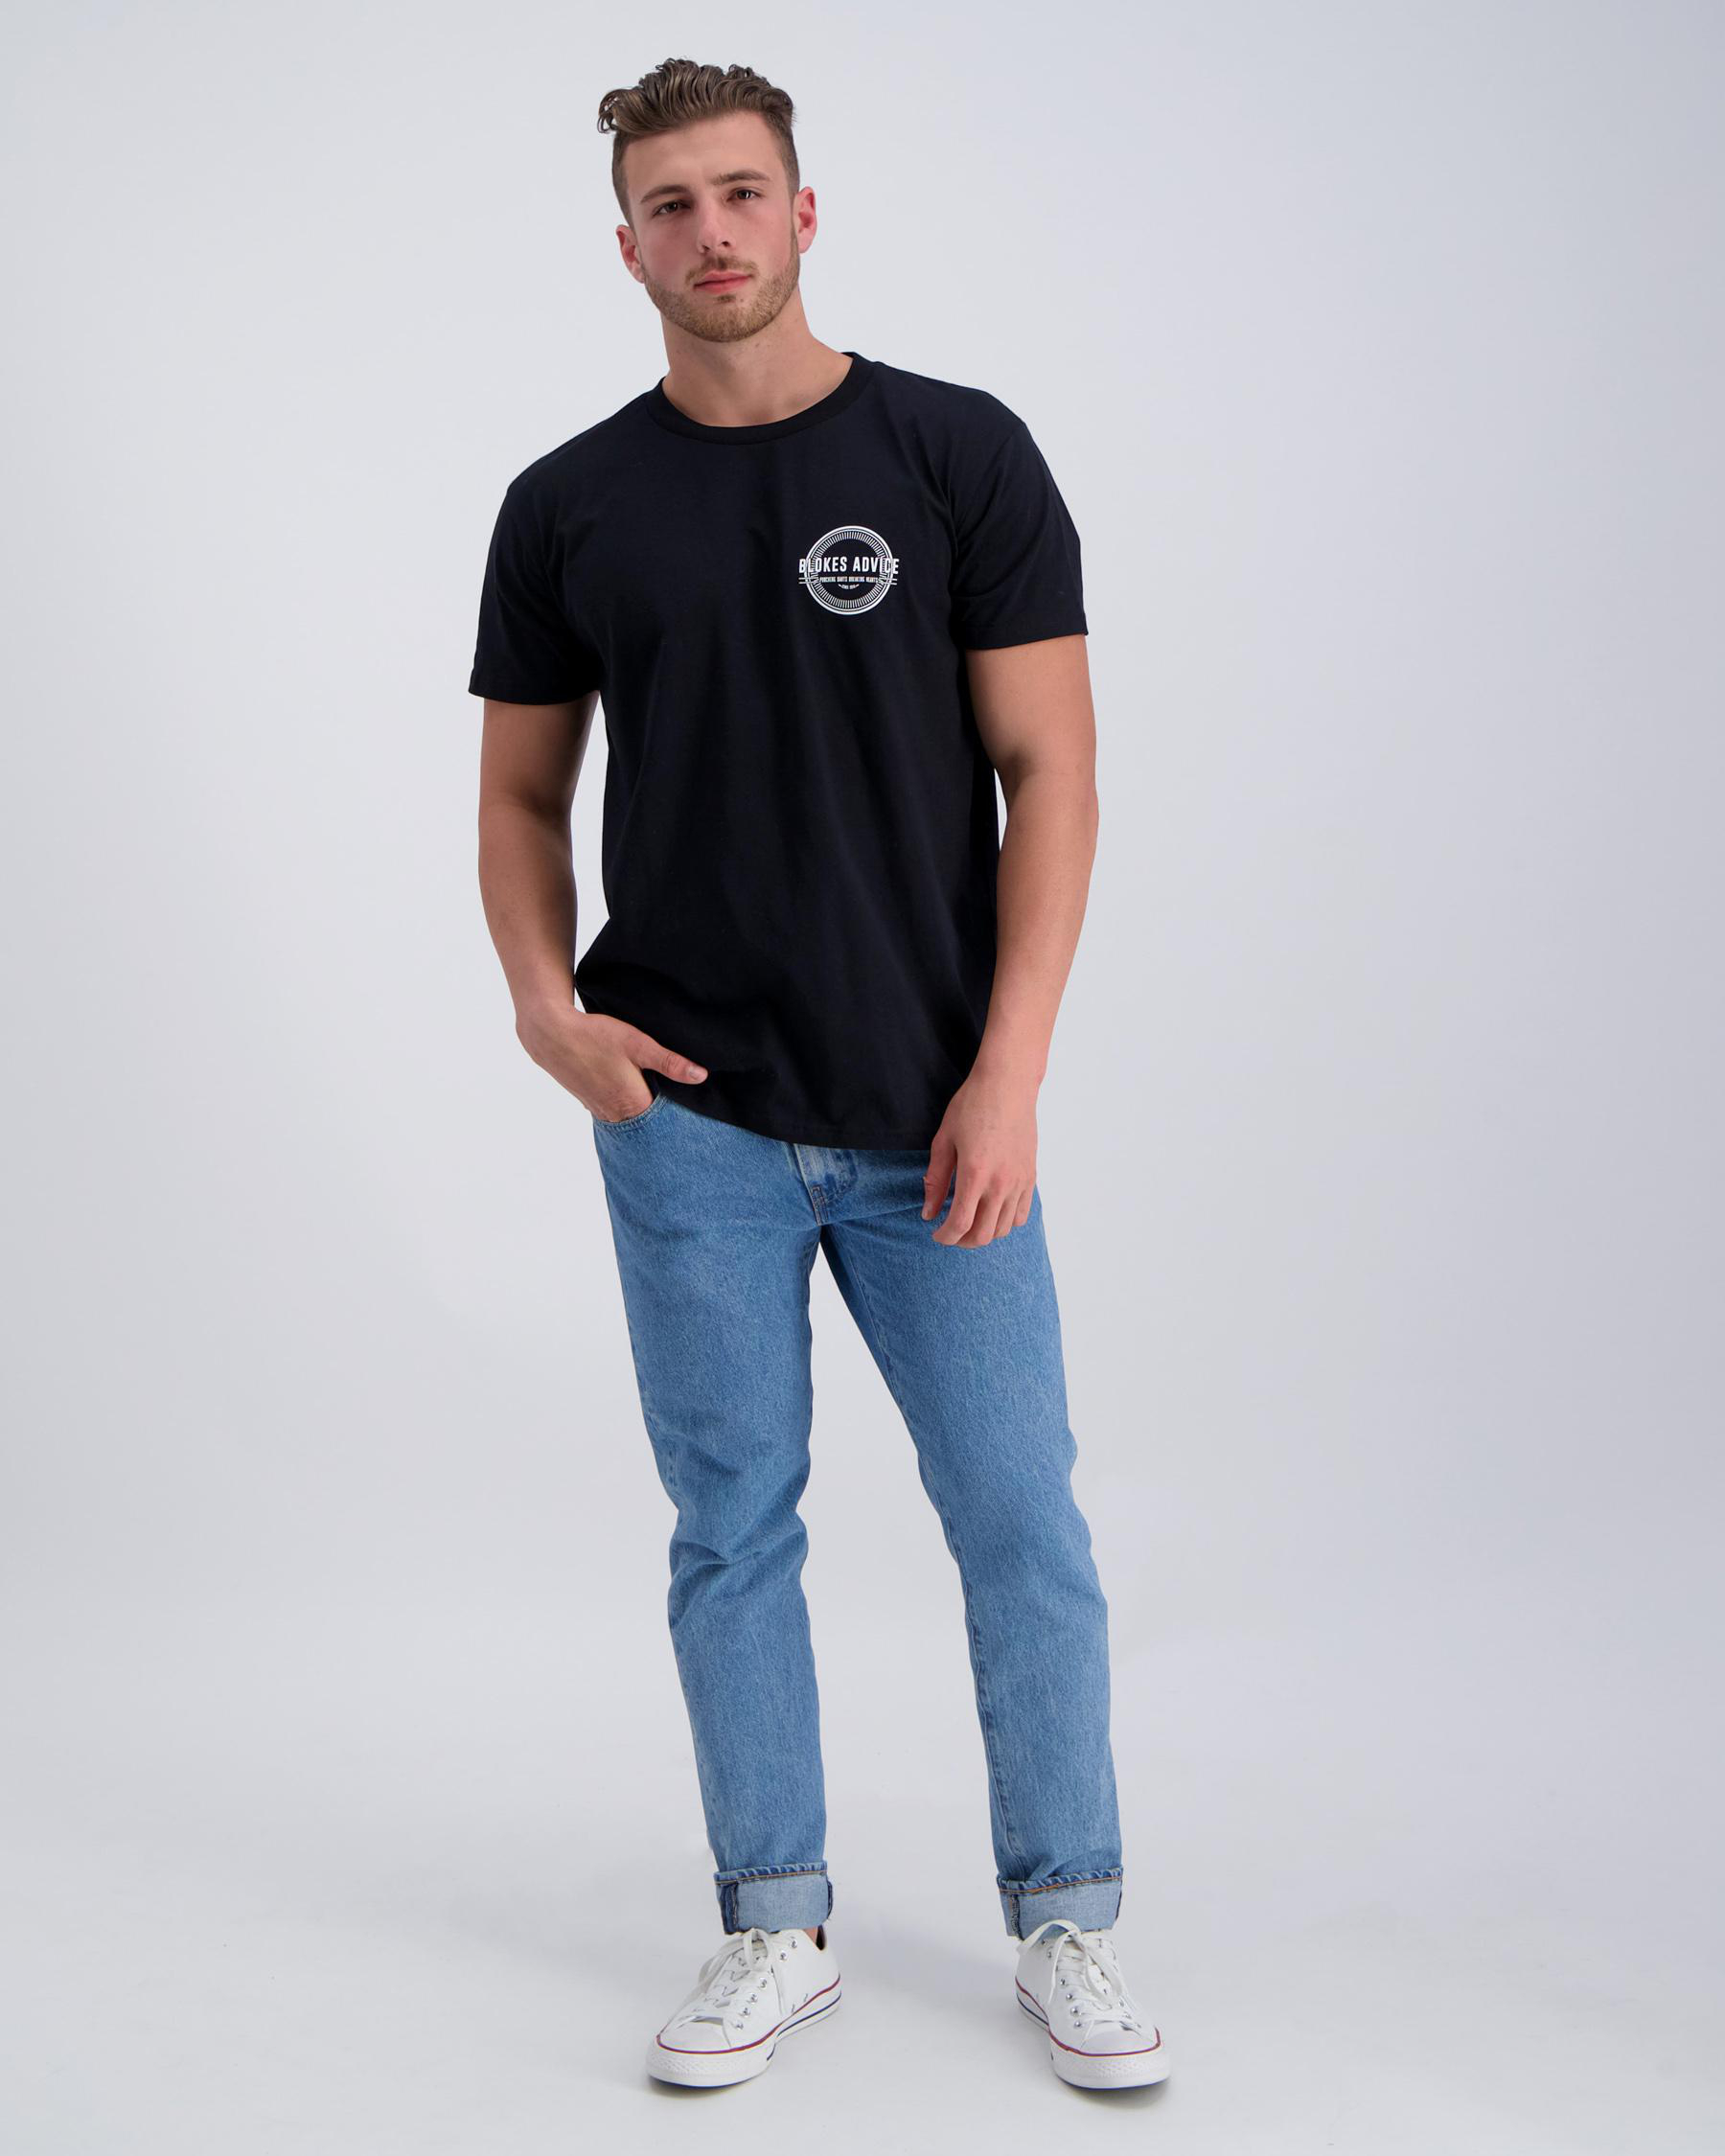 Blokes Advice Circle T-Shirt In Black - Fast Shipping & Easy Returns ...